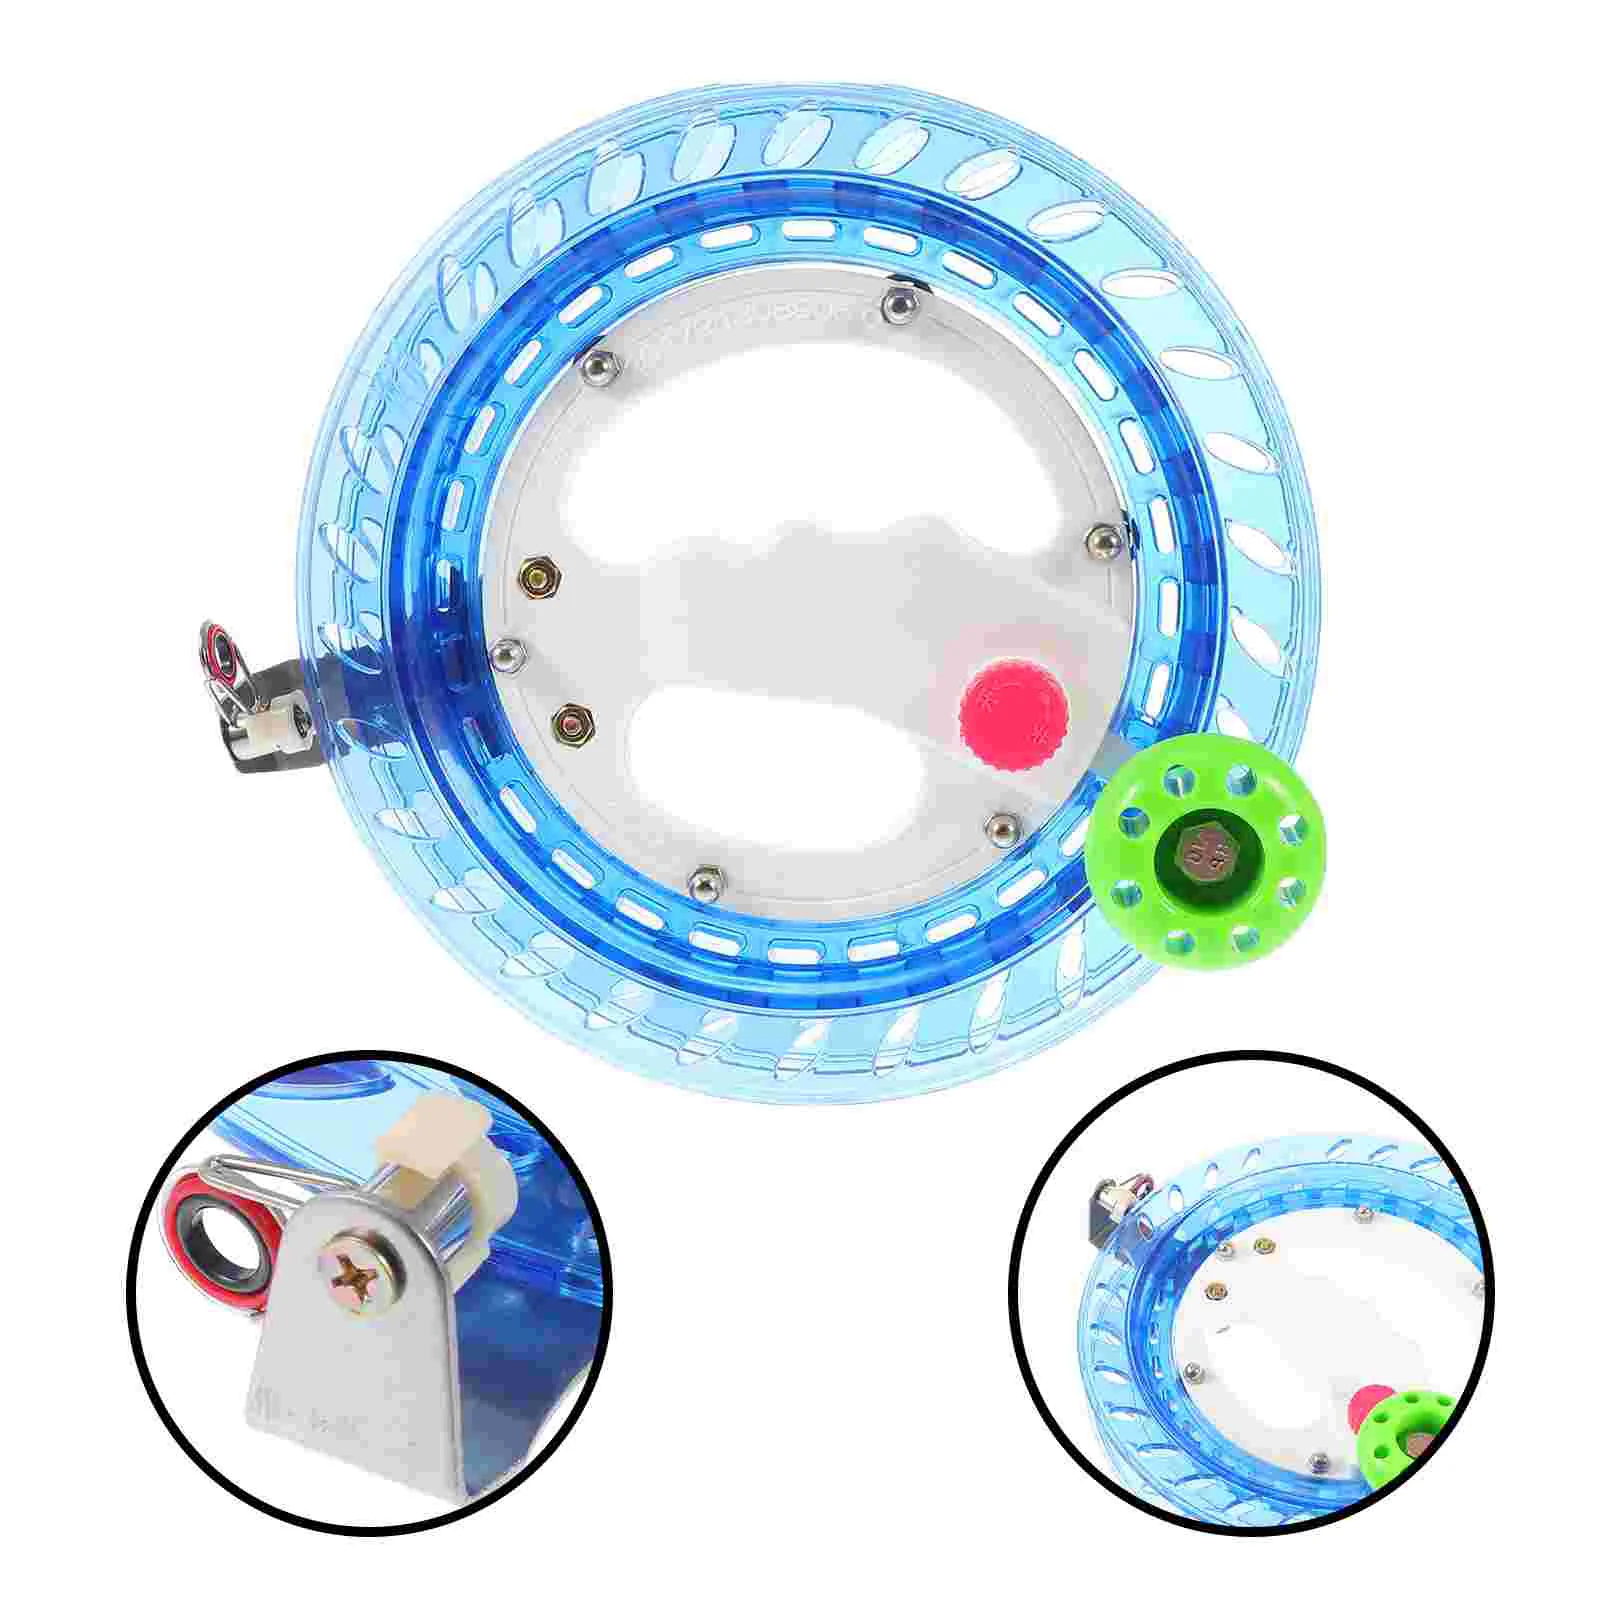 

Kite Reel Ball Bearings Line Wheel Outdoor Sports Tool Connector Plastic Hand Hold Holding Child Used